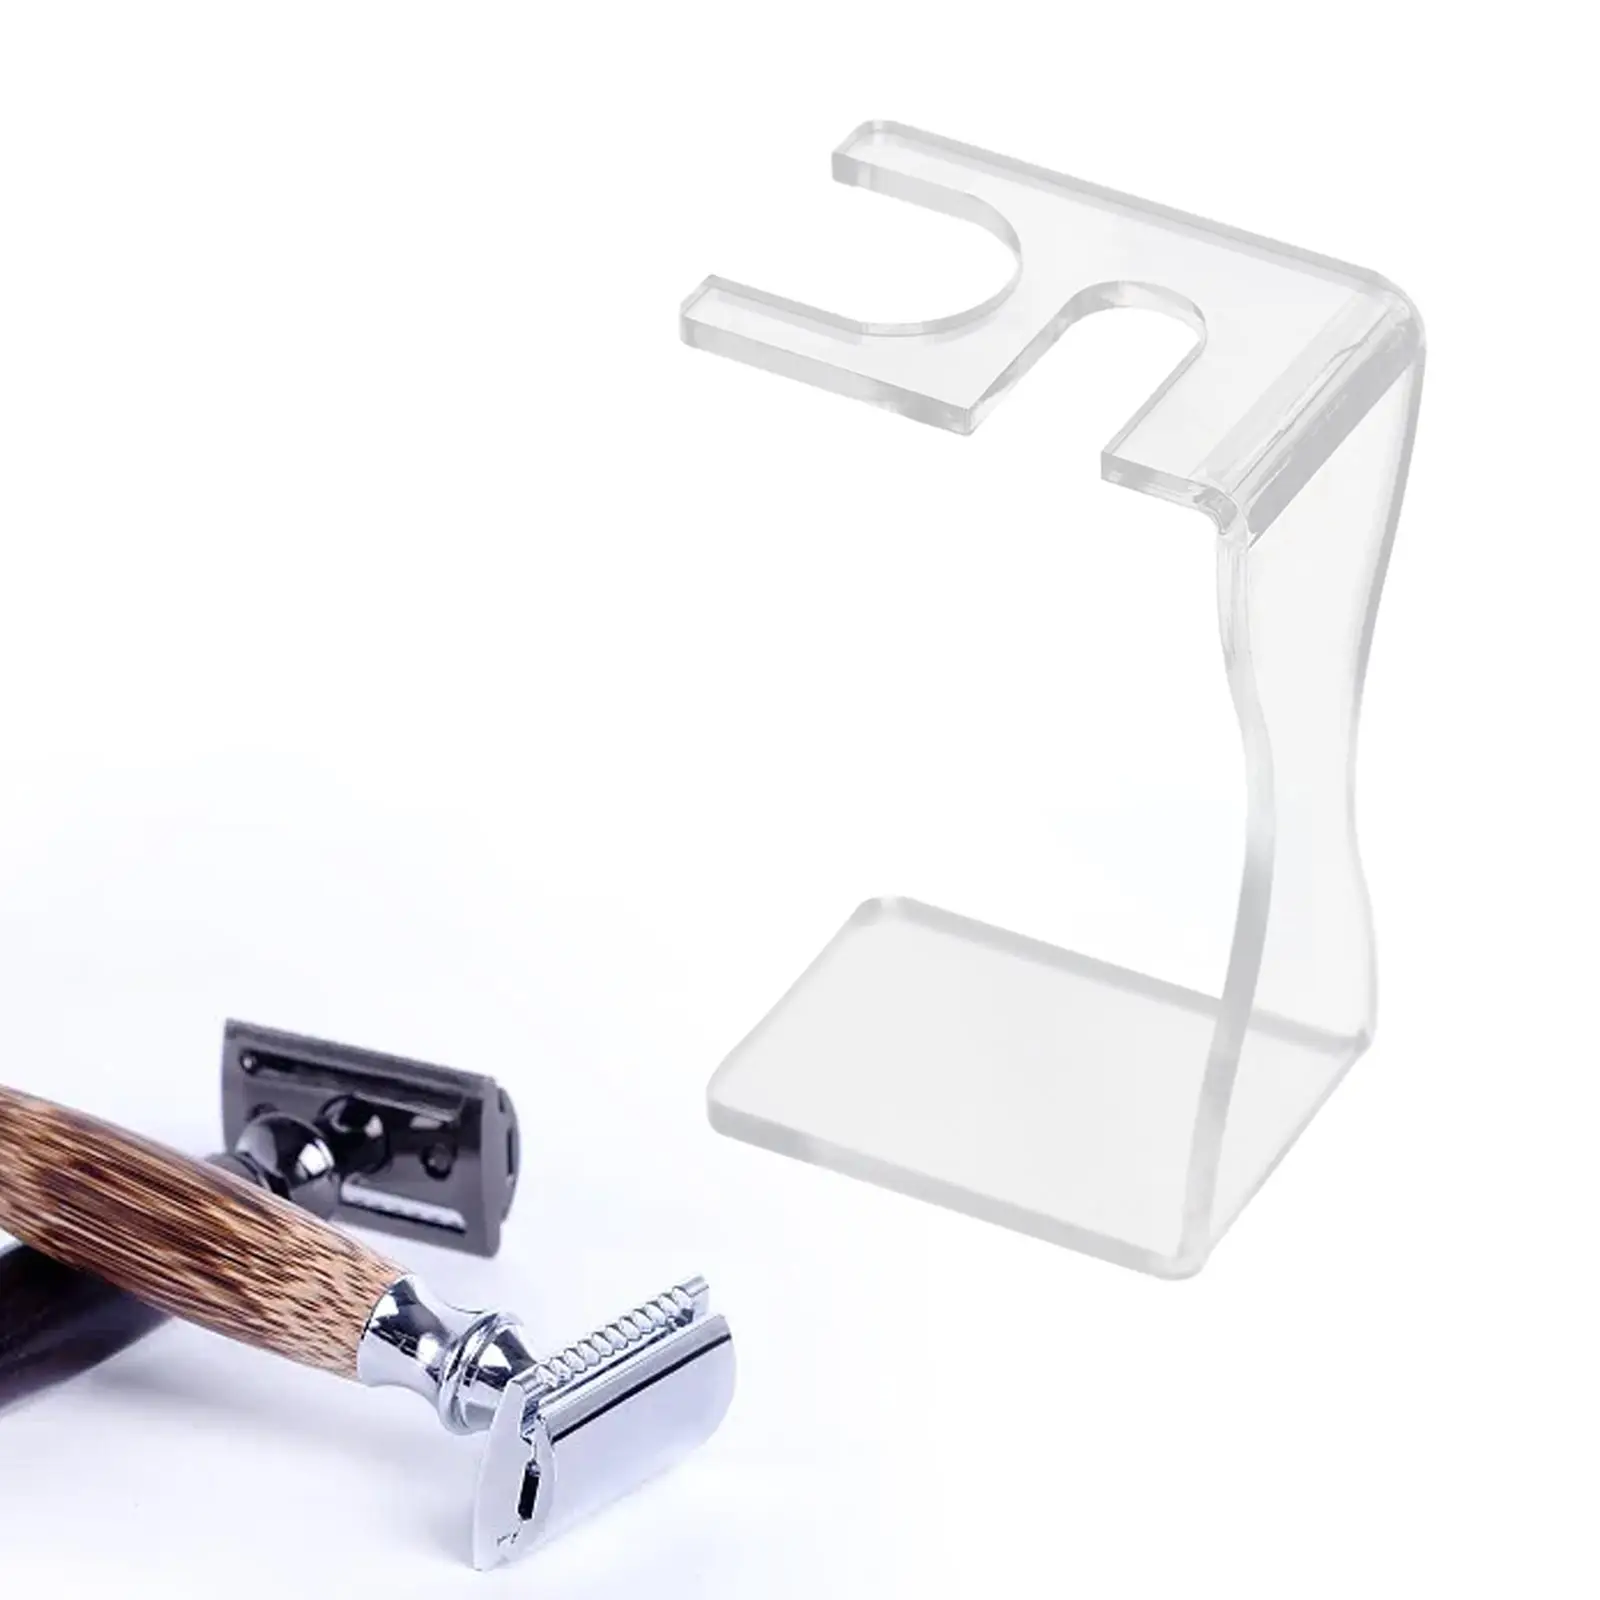 Men Shaving Display Stand Organizer Multifunctional Functional Stable Bottom Sturdy Accessory for Wet Shaving Enthusiastic